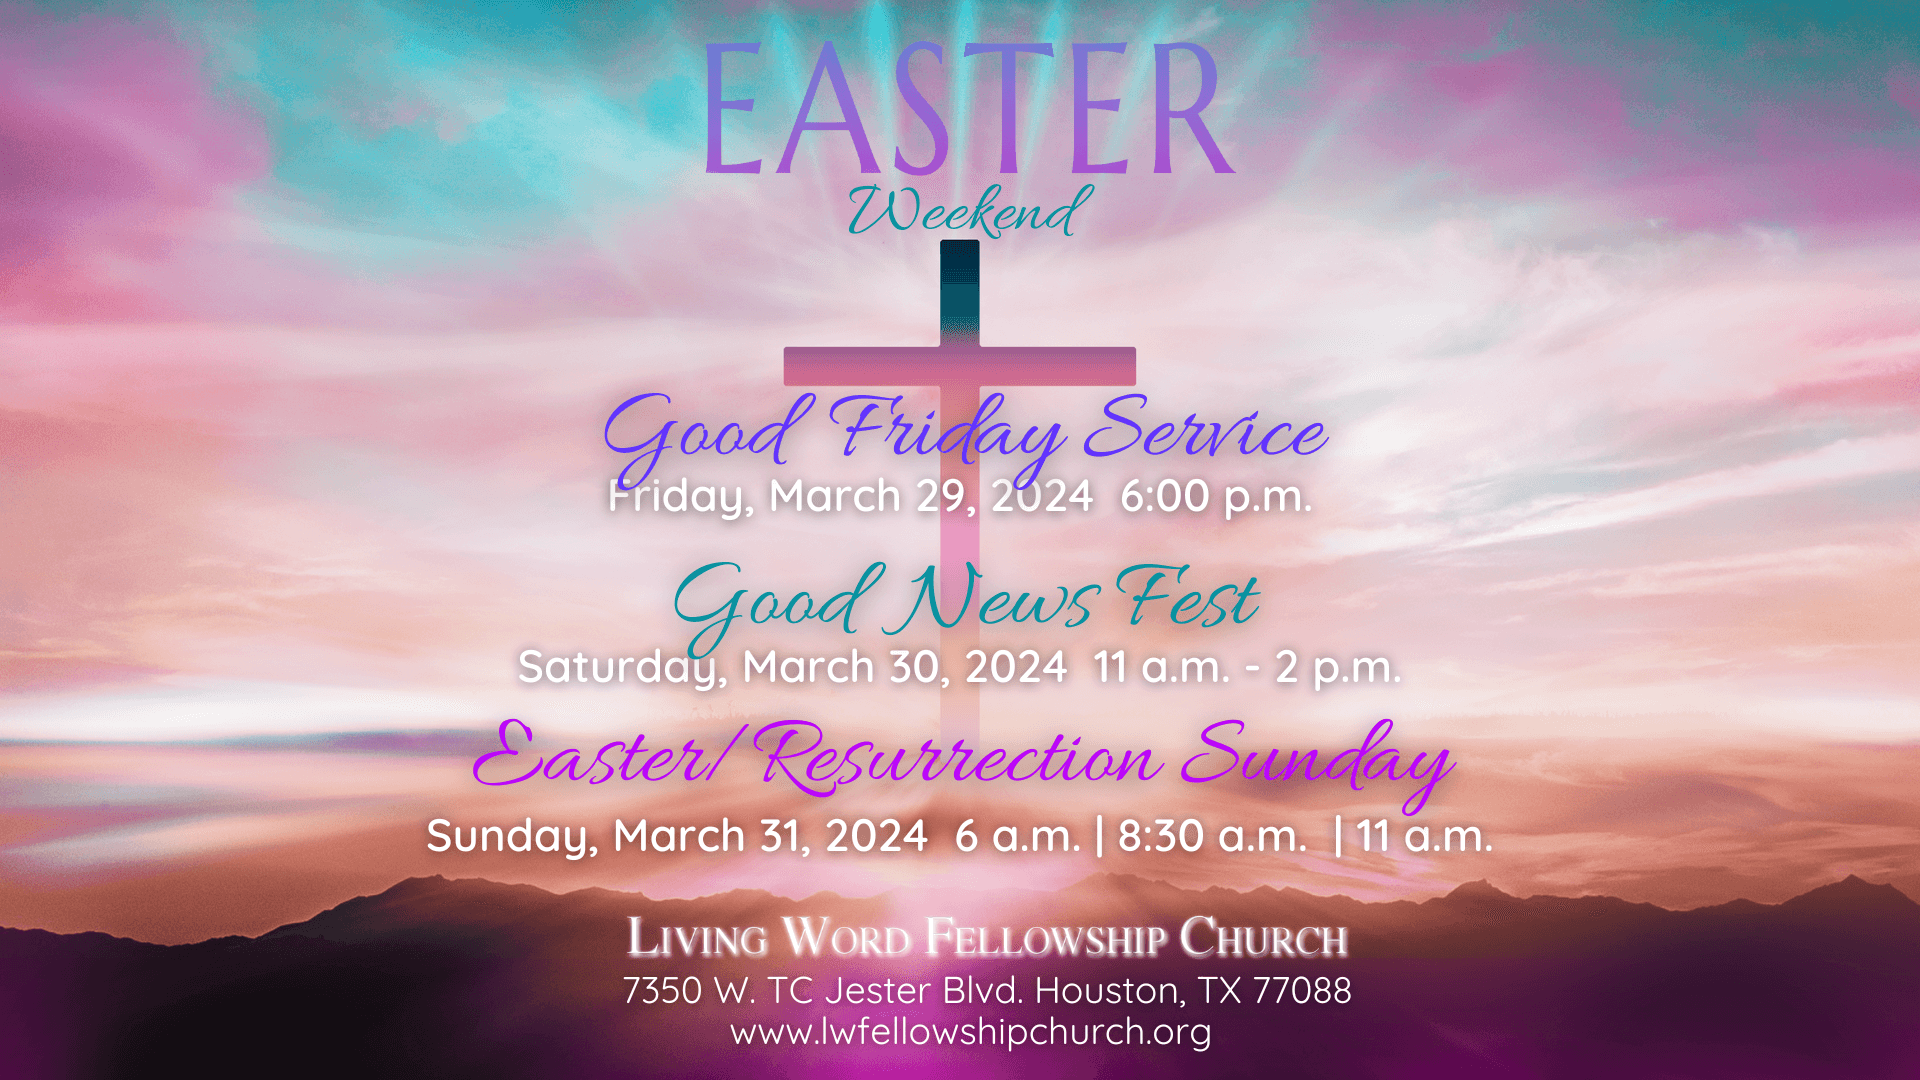 easter weekend services: good friday mar 29 6pm, good news fest mar 30 11am-2pm, easter sunday 6am, 8:30am, and 11am